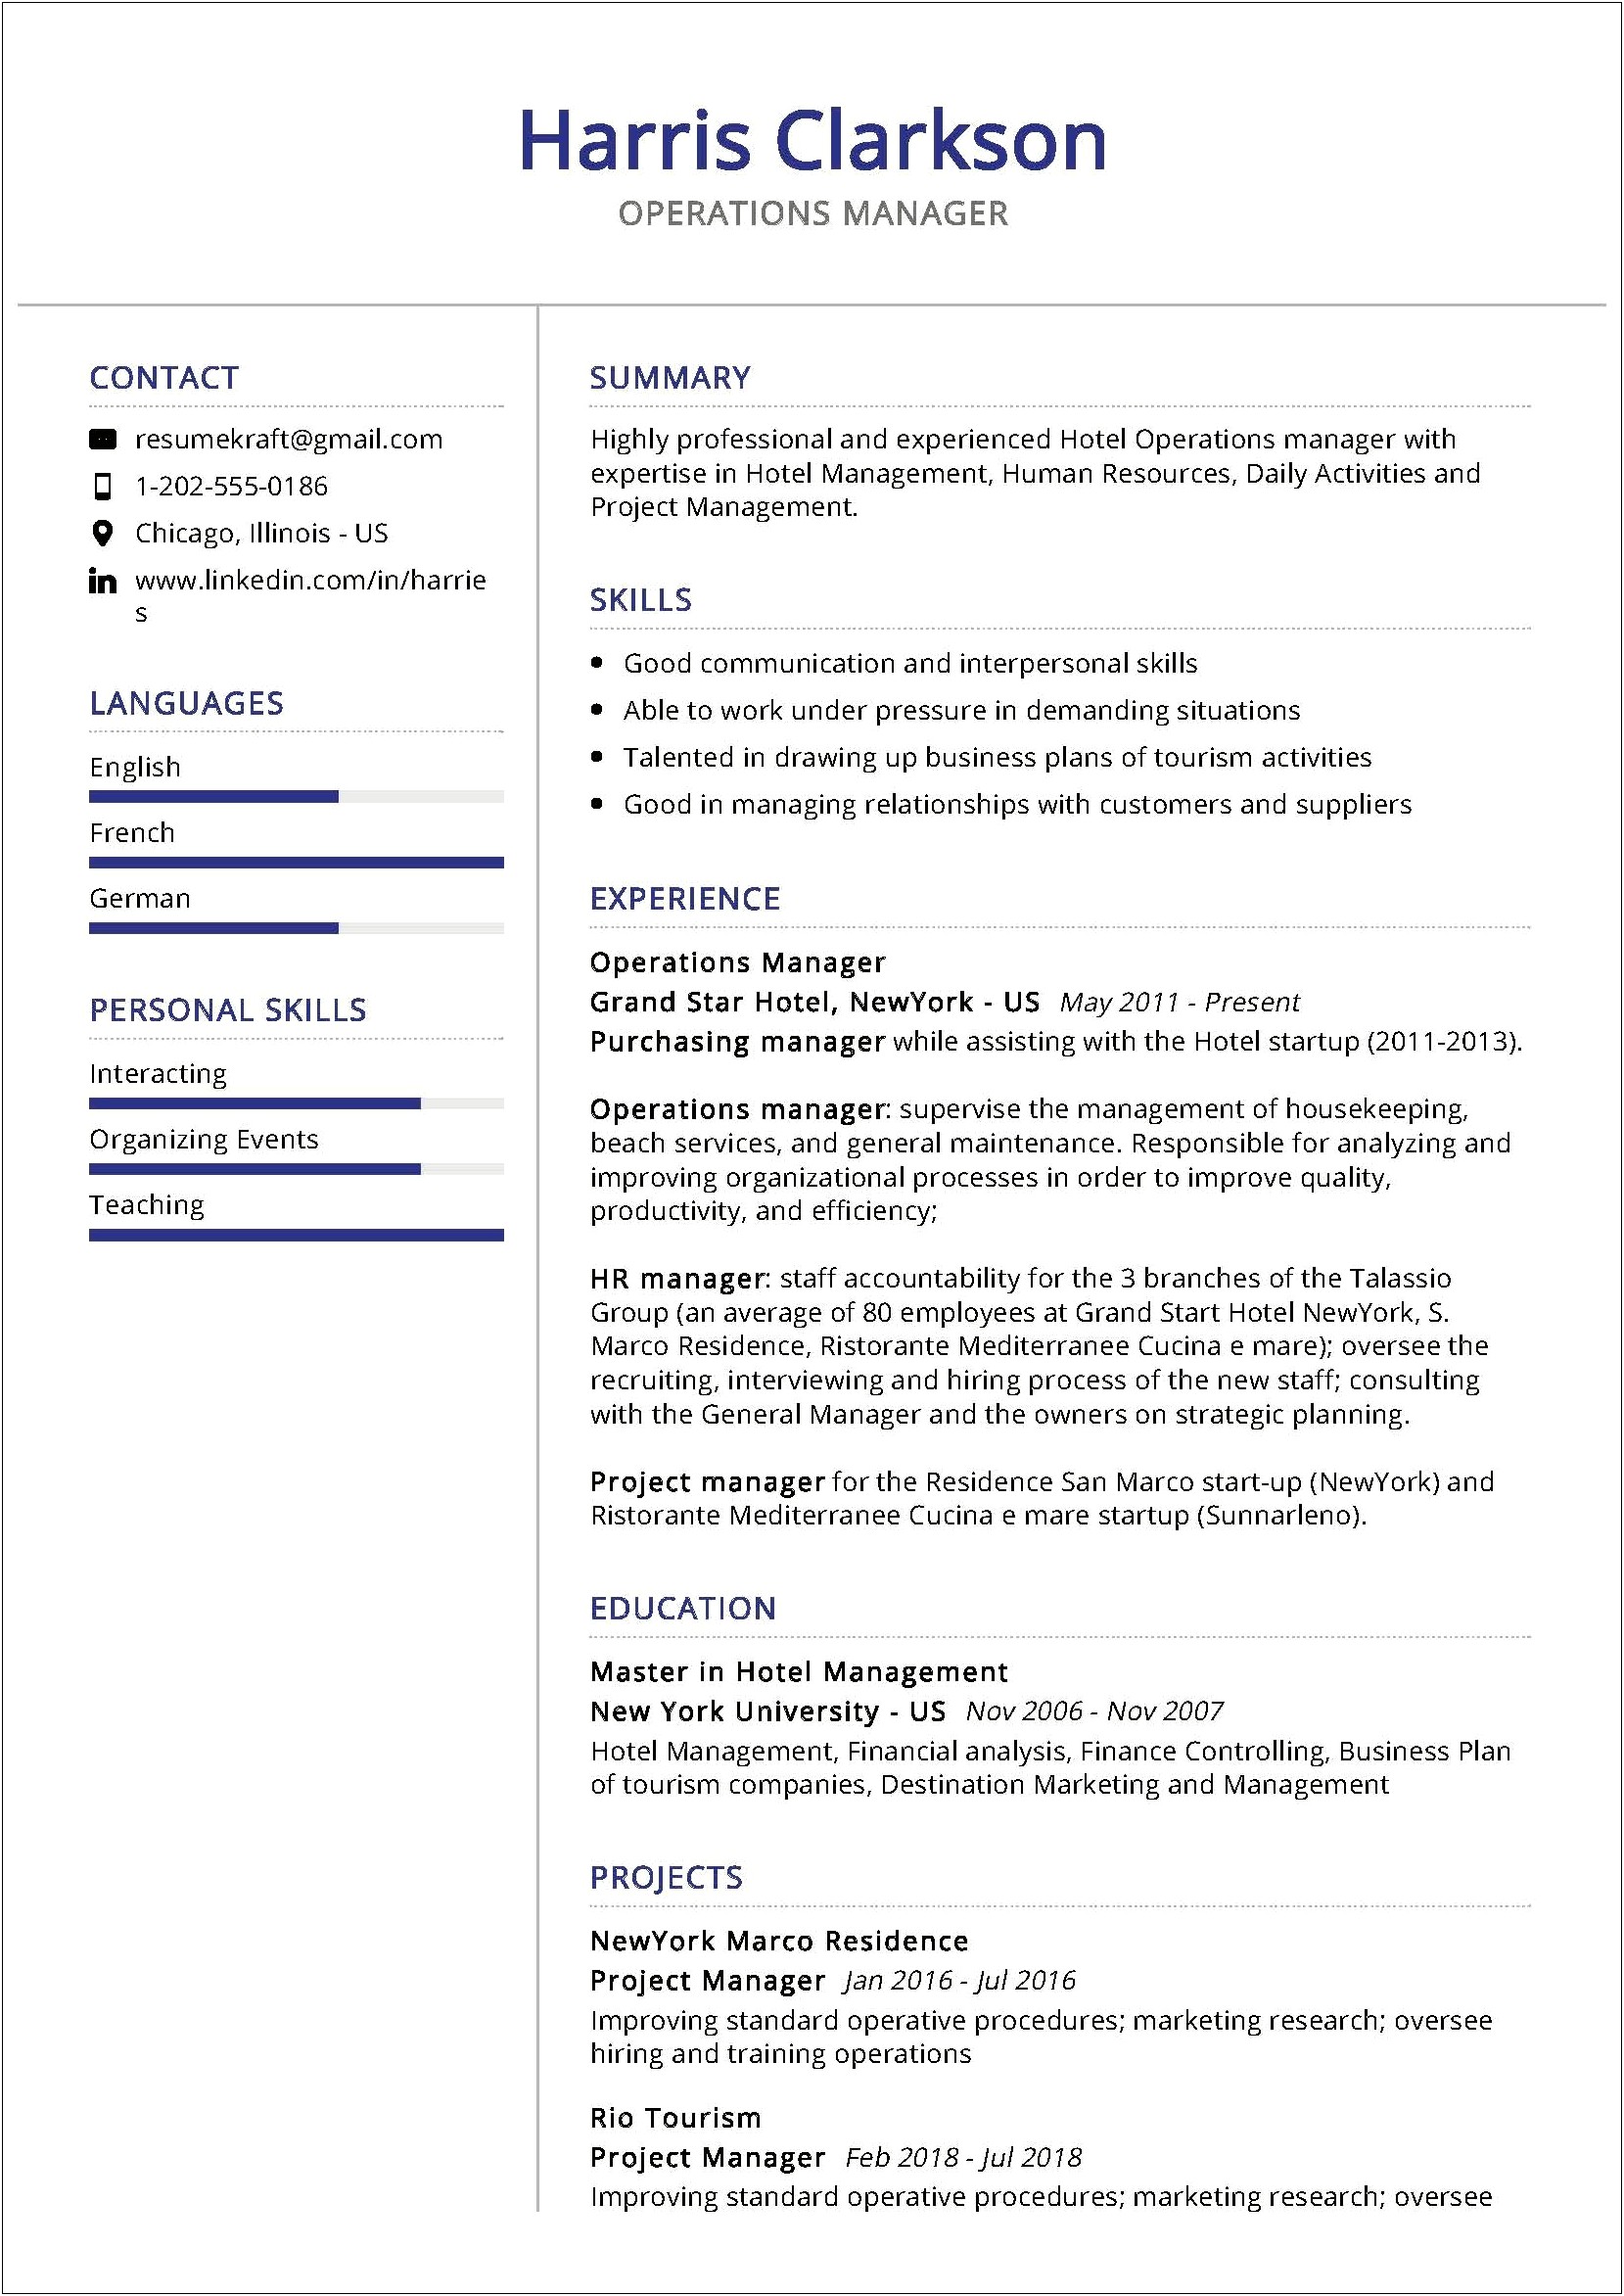 Best Operations Manager Resume 2019